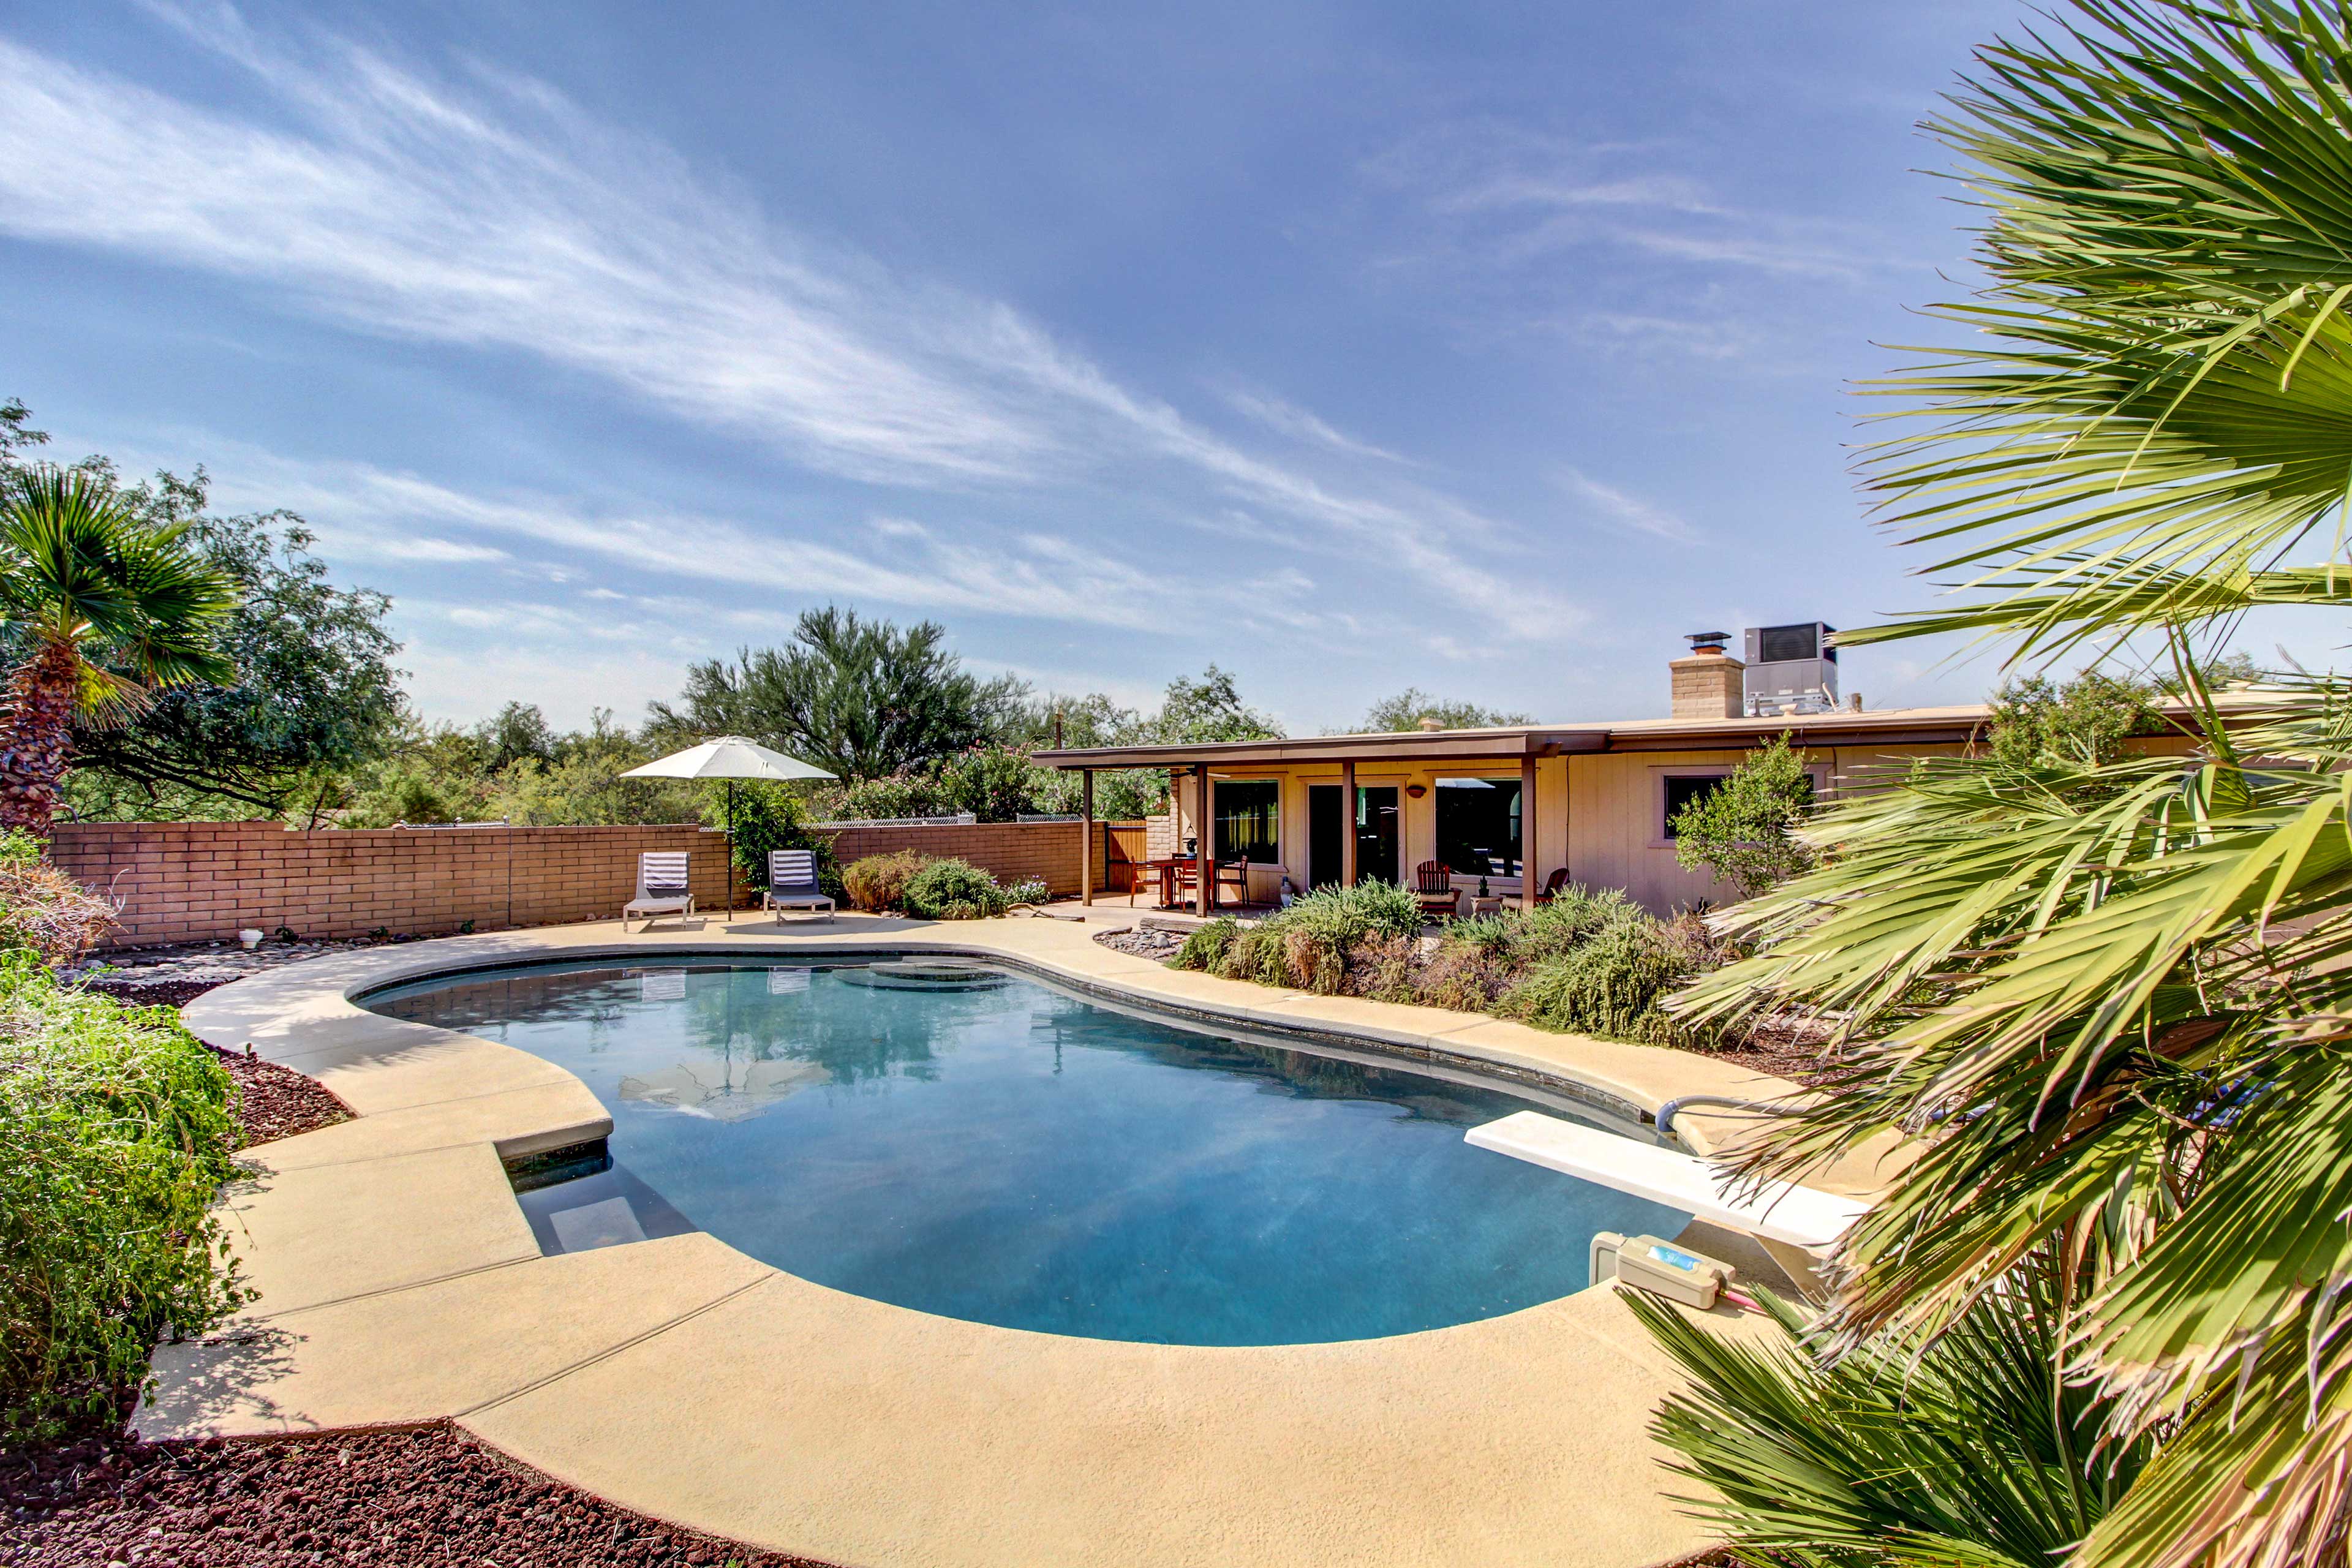 Tucson Vacation Rental | 3BR | 2BA | 1 Step Required | 1,700 Sq Ft